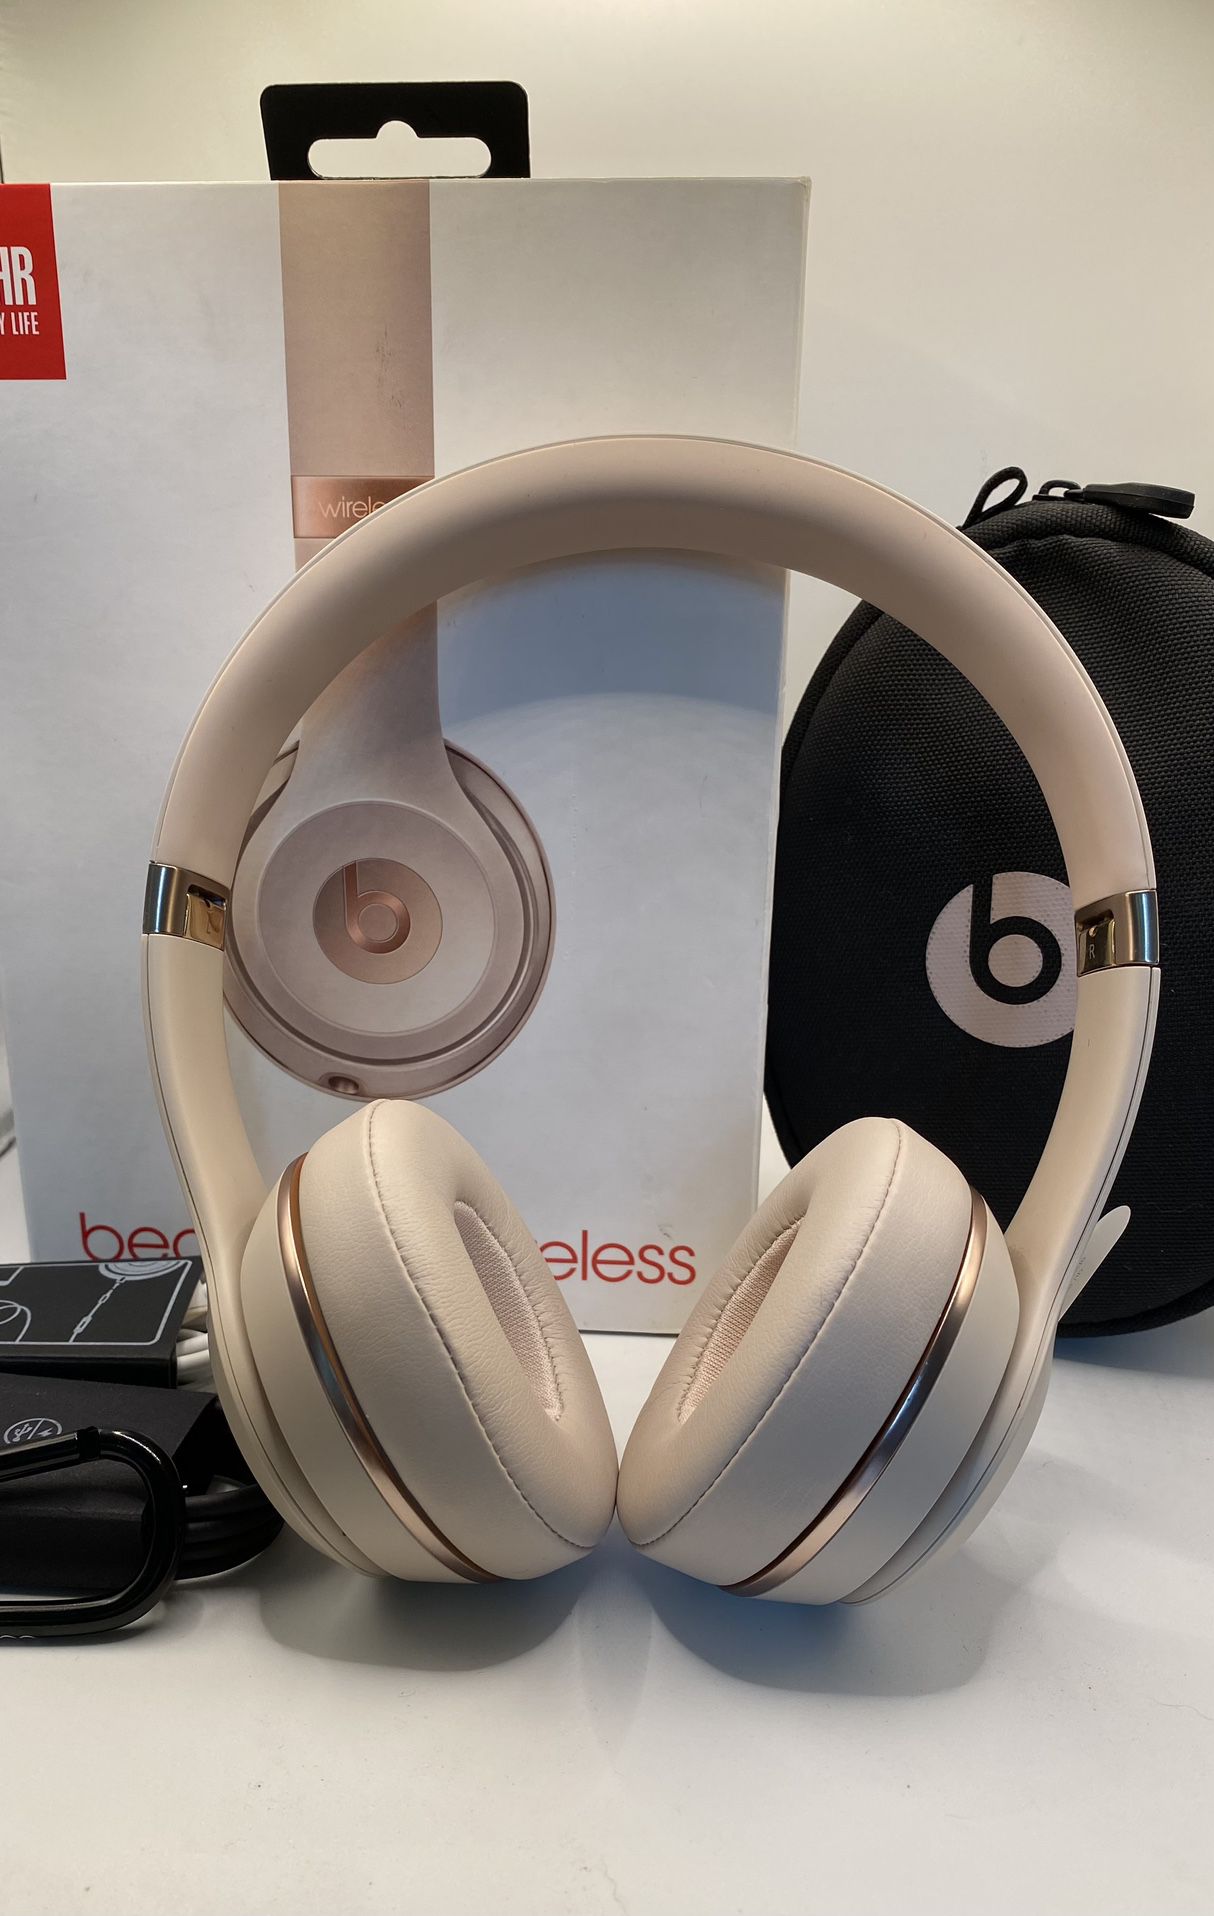 afrikansk Litteratur Skrive ud (Authentic) Matte Gold Beats Solo 3 Bluetooth Wireless Headphones With Box  #1829 for Sale in Orlando, FL - OfferUp